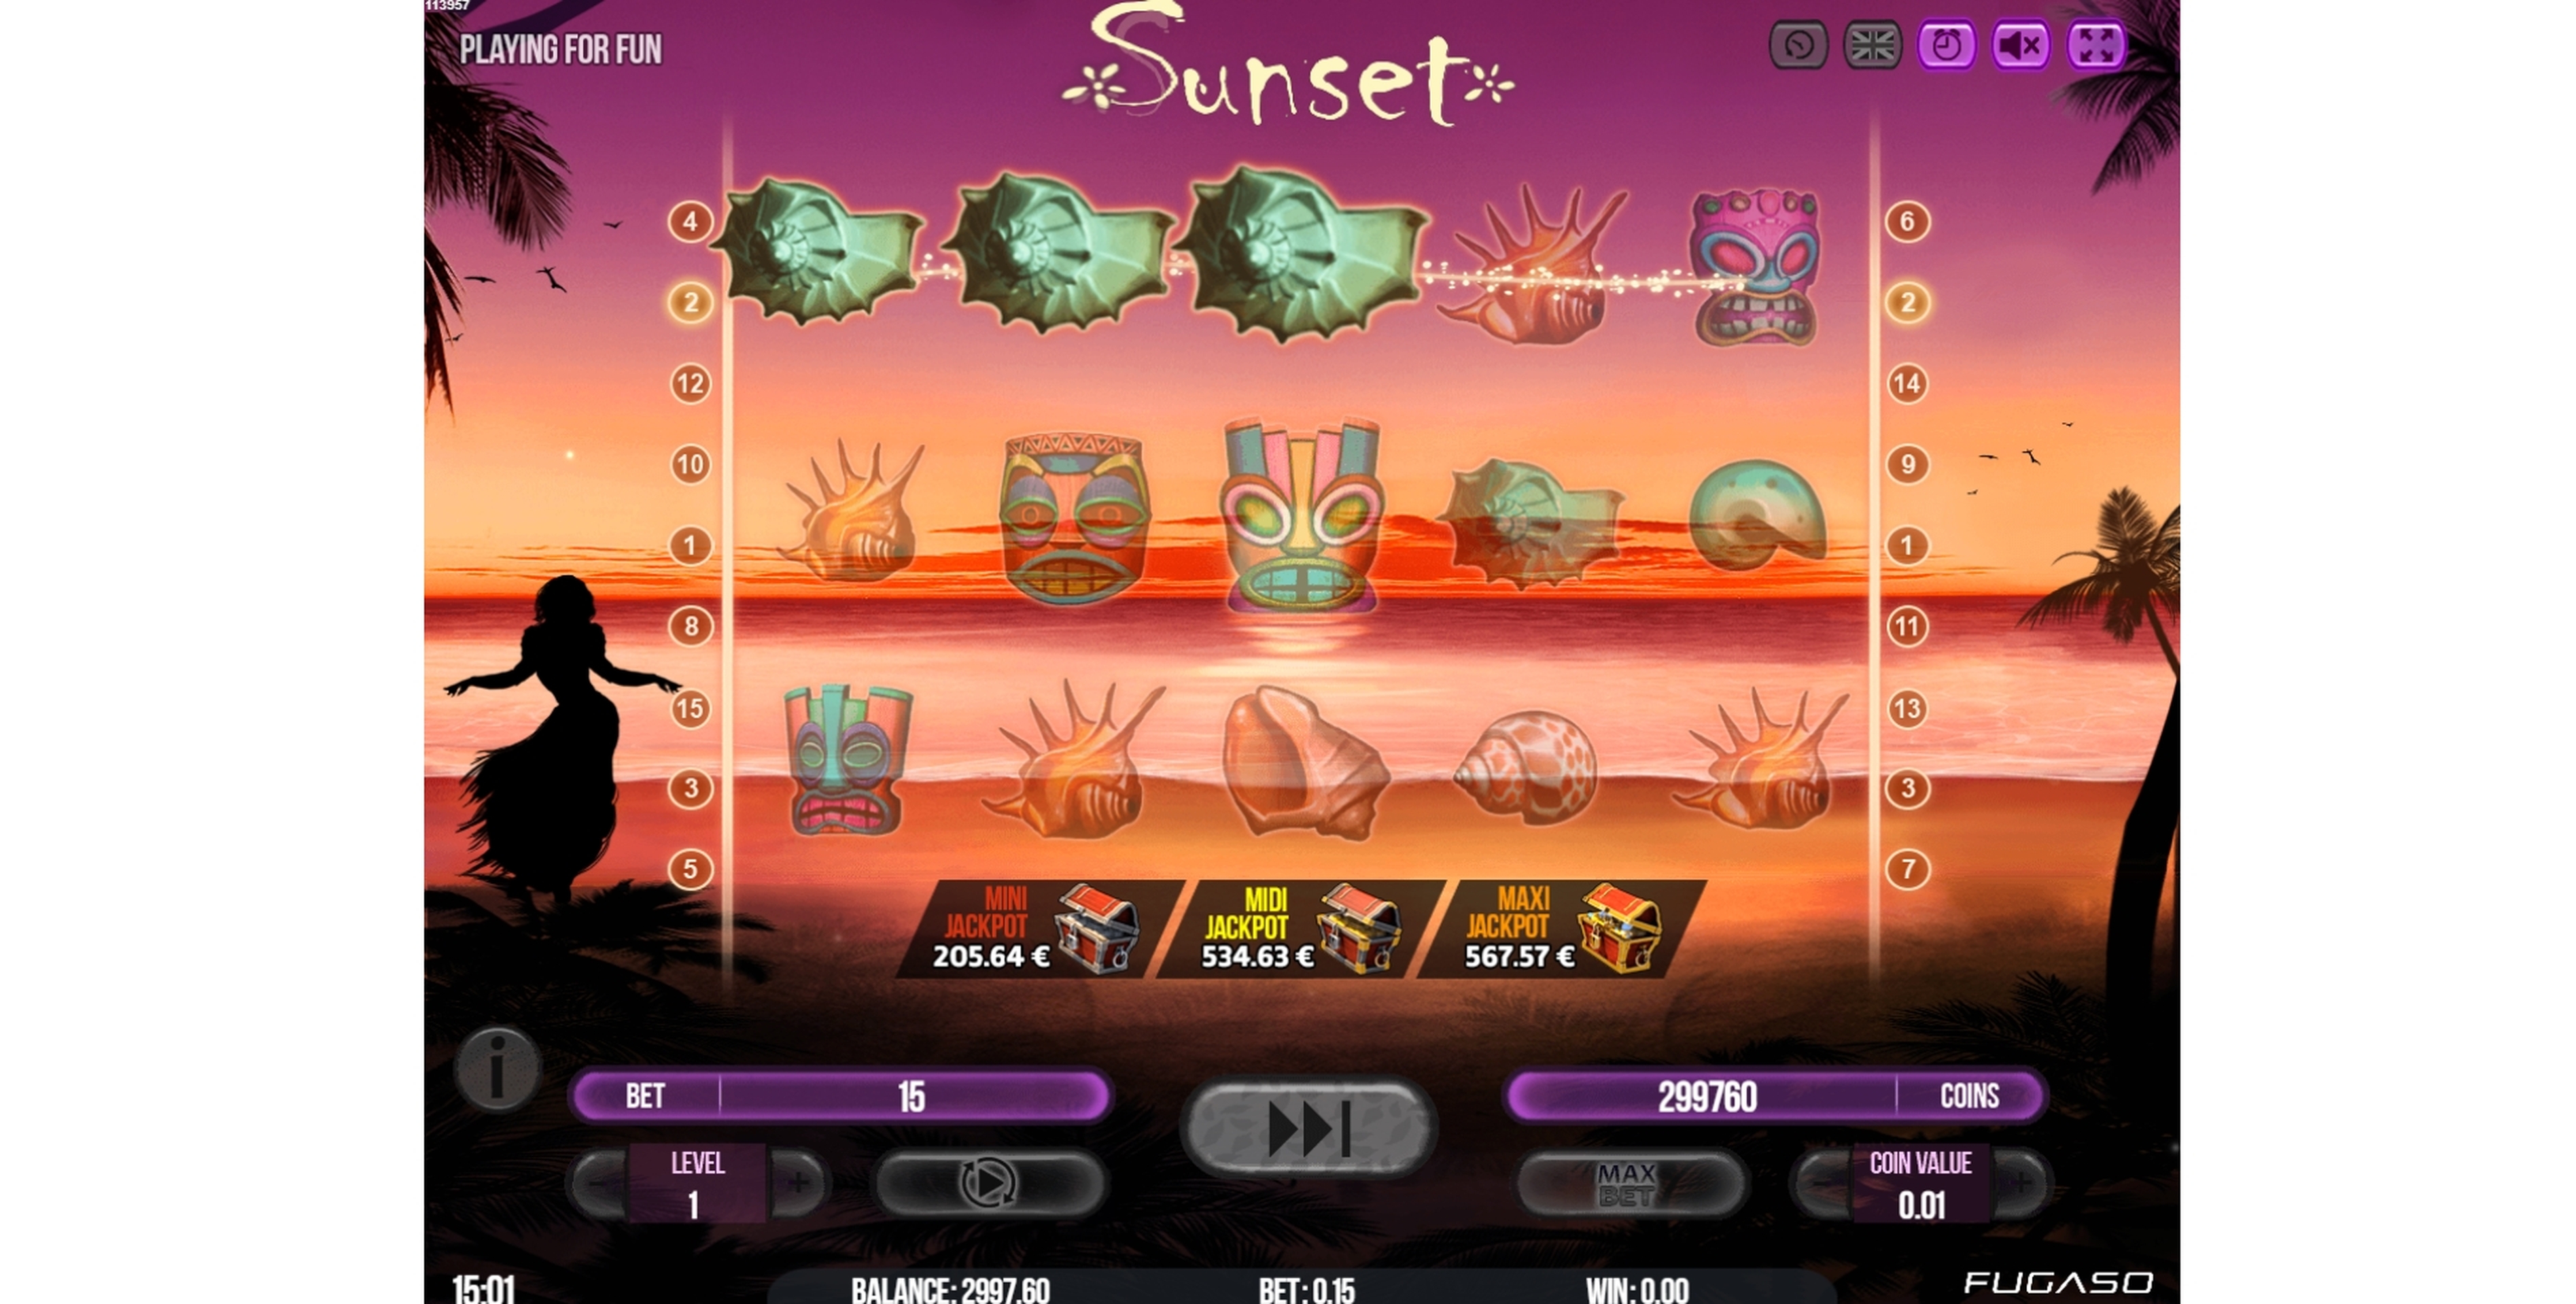 Win Money in Sunset Free Slot Game by Fugaso